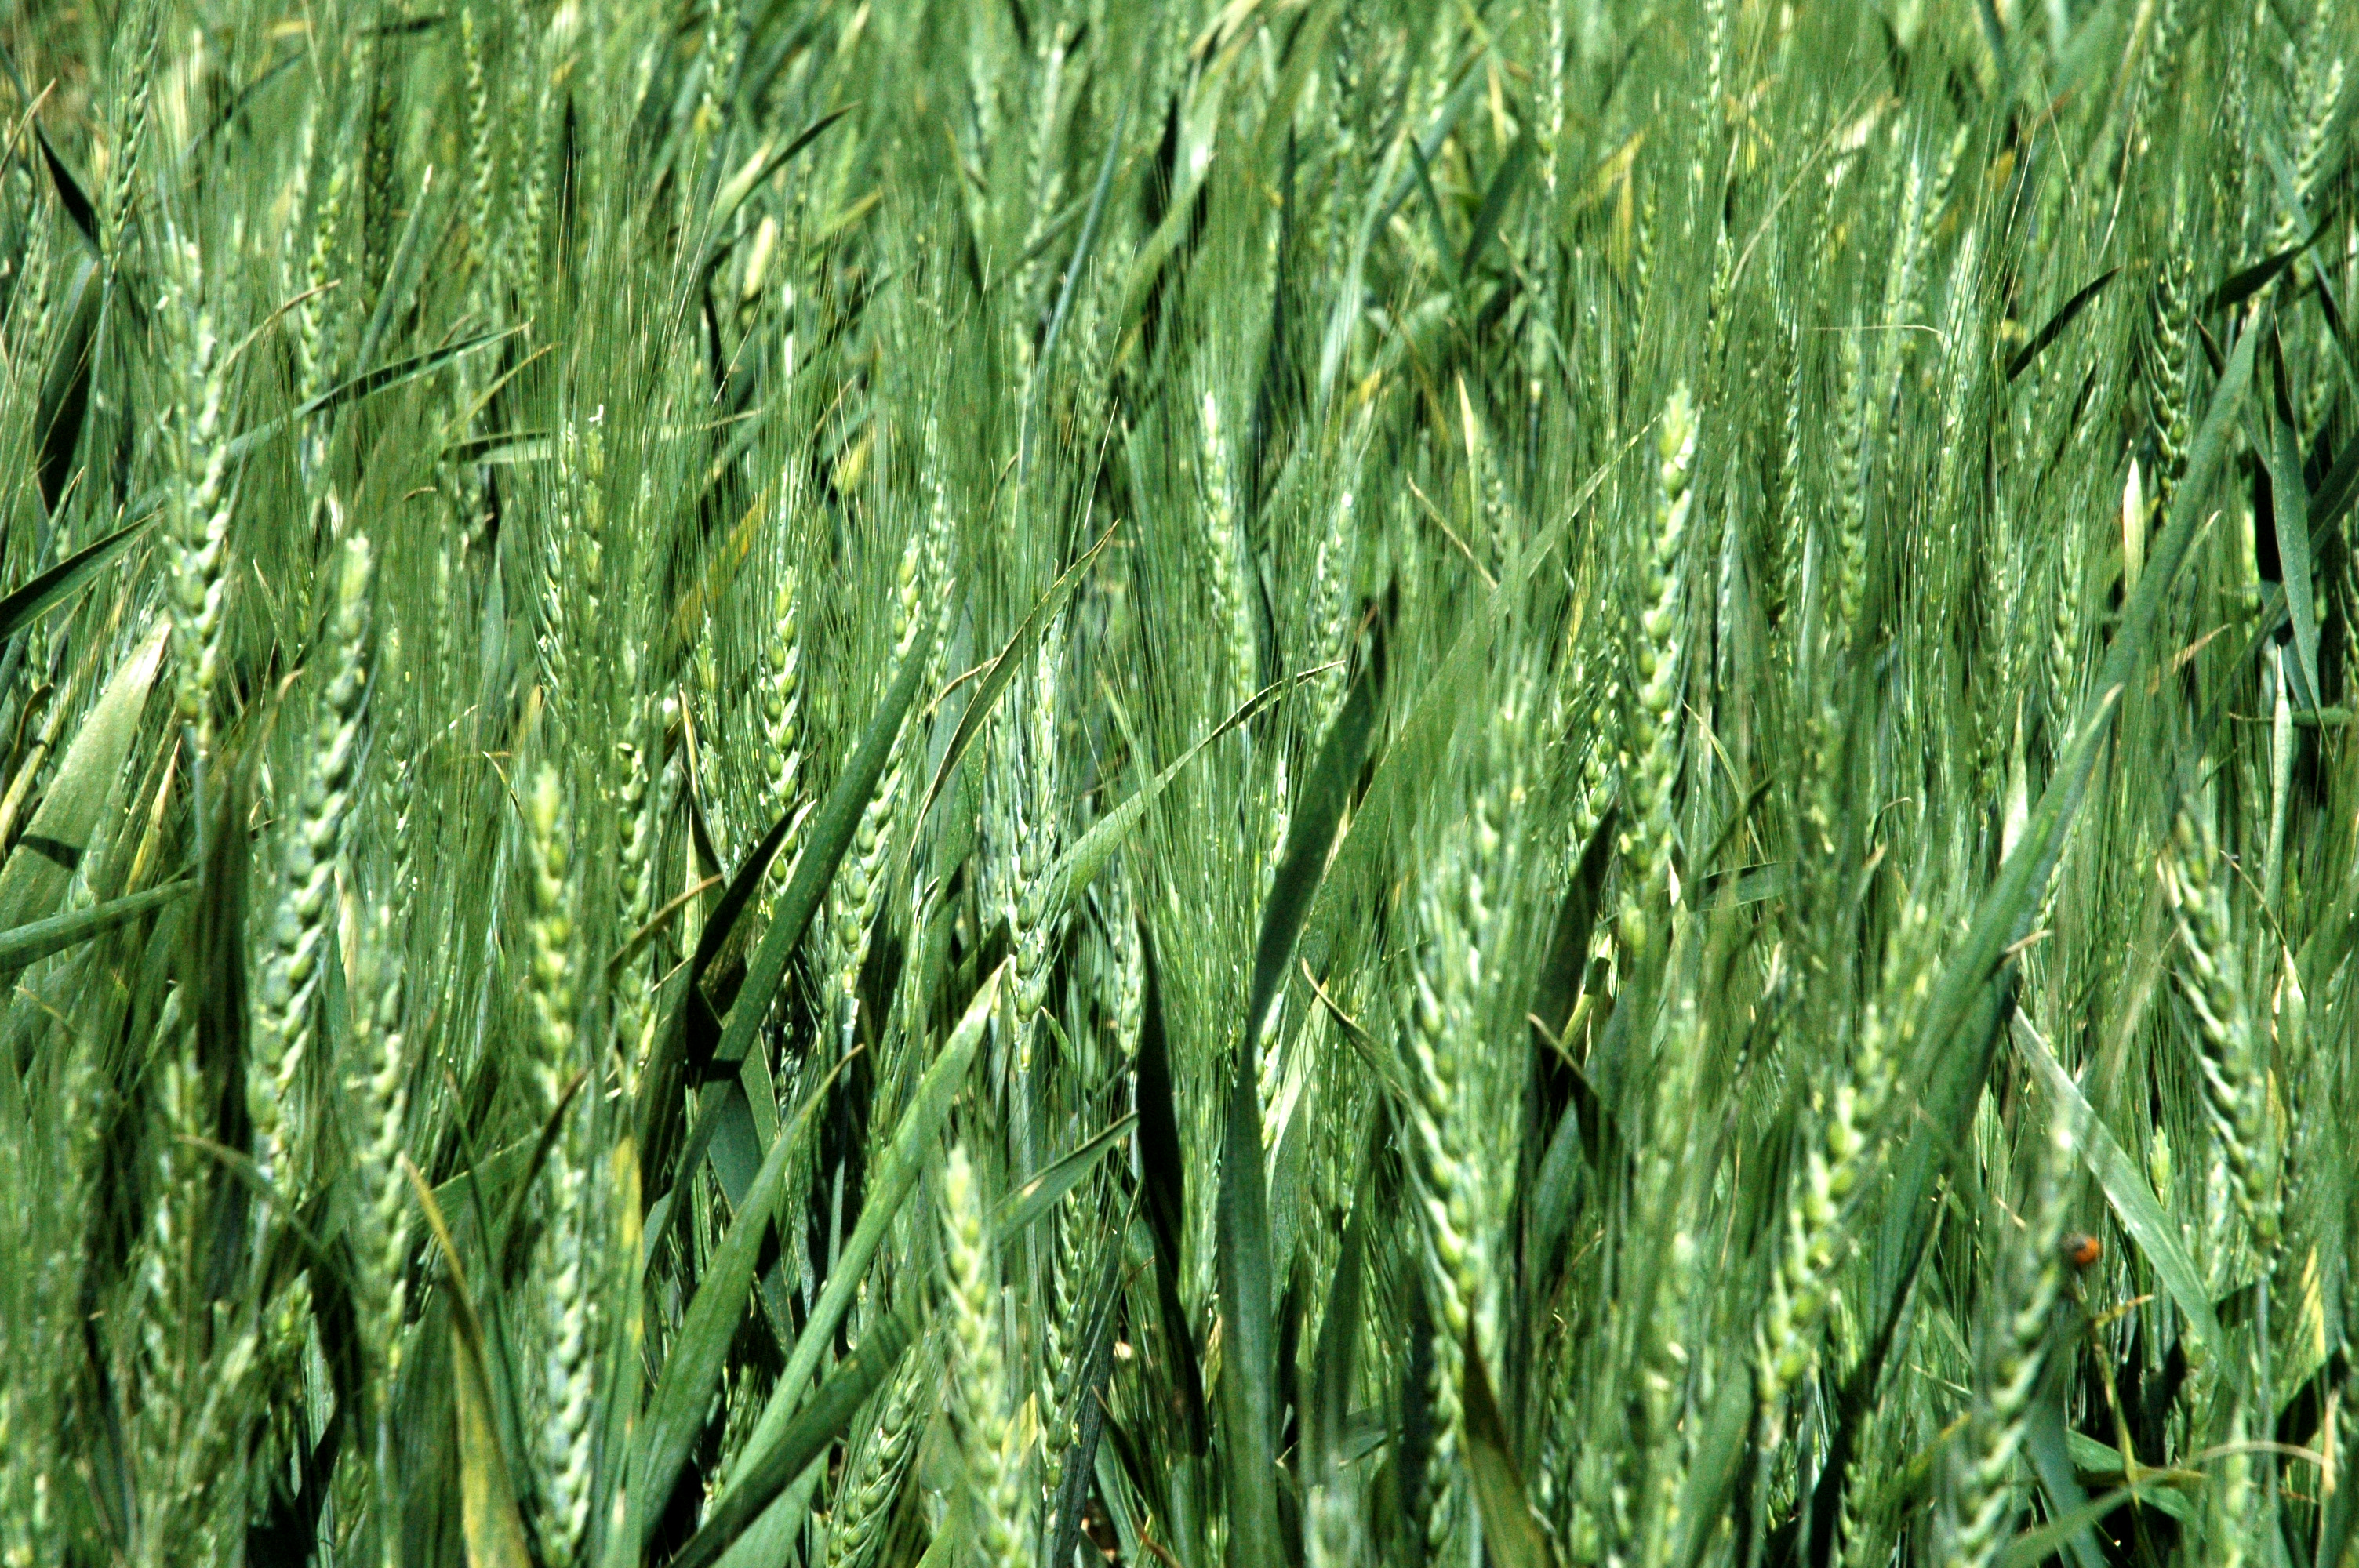 Can wheat become a more 'statewide' crop? | AgriLife Today